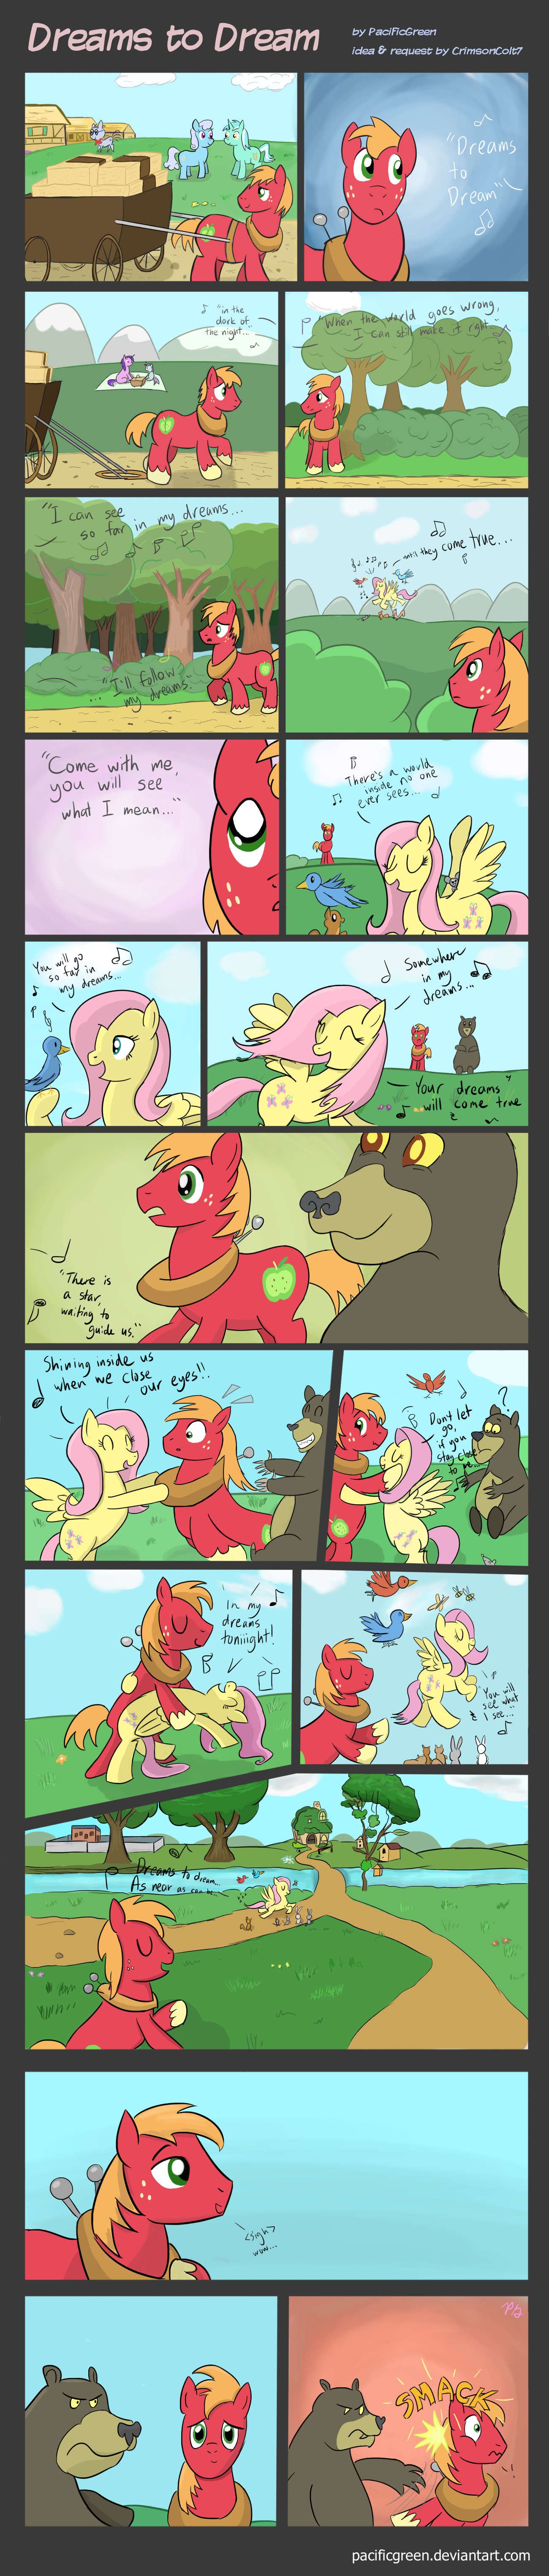 [Obrázek: request__mlp__dreams_to_dream_by_pacific...aqllxj.png]